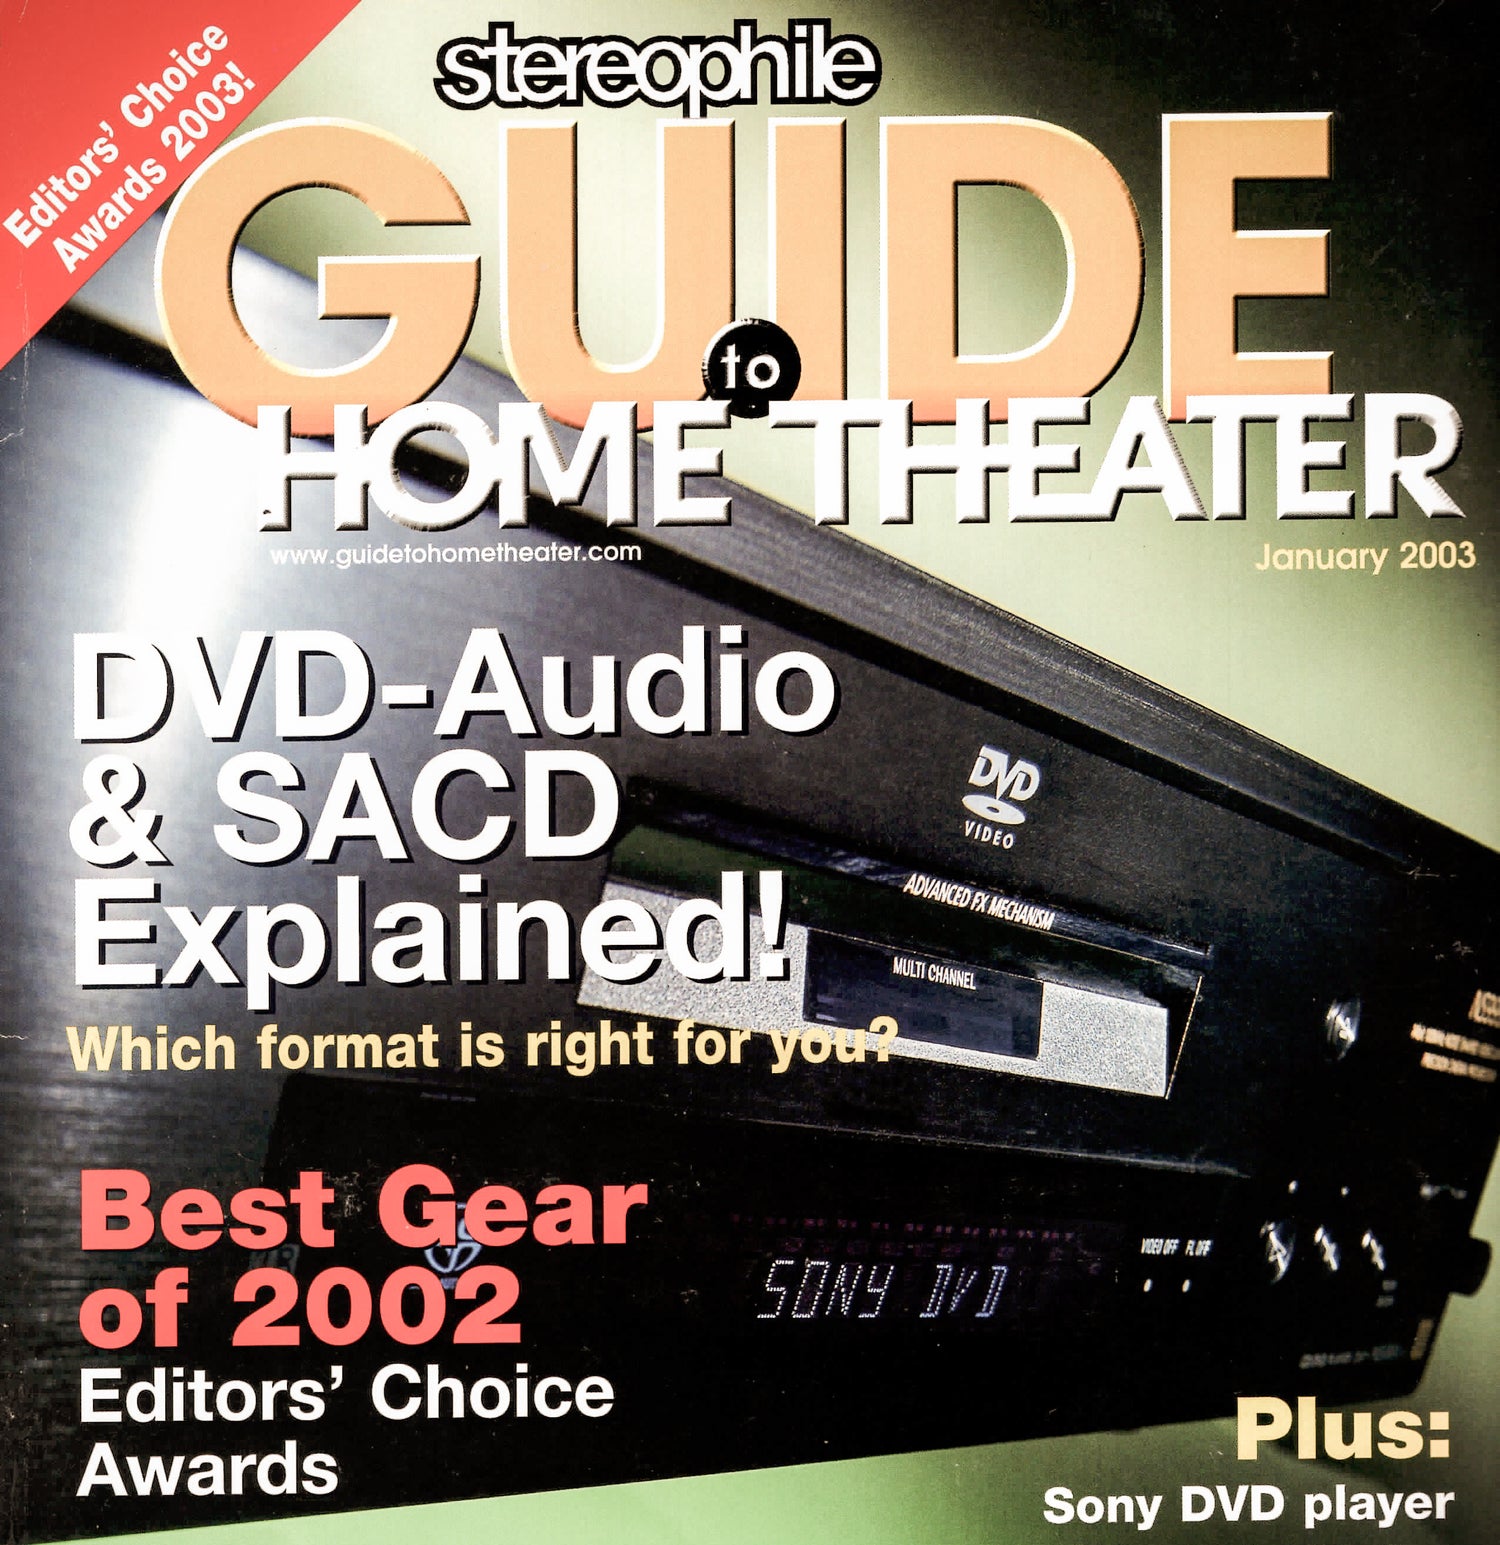 Stereophile Guide to Home Theater Editor's Choice: Best Gear of 2002